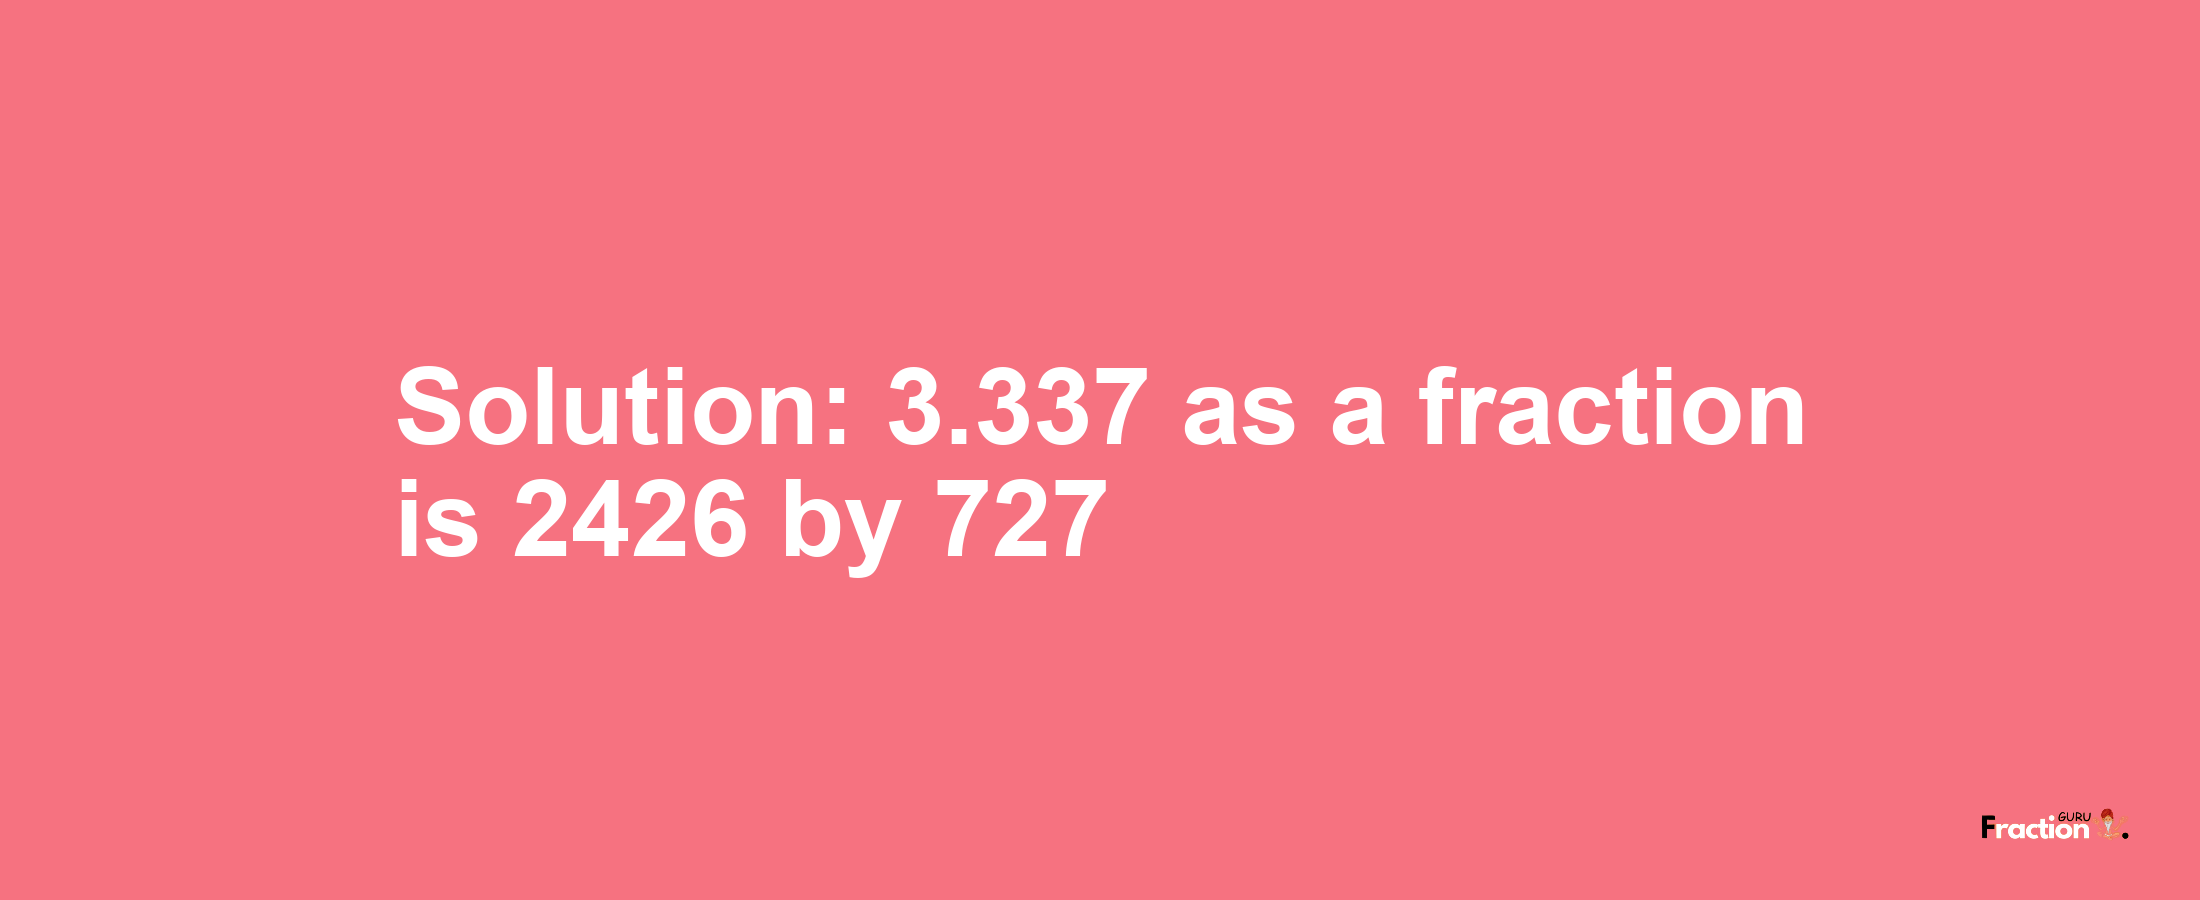 Solution:3.337 as a fraction is 2426/727